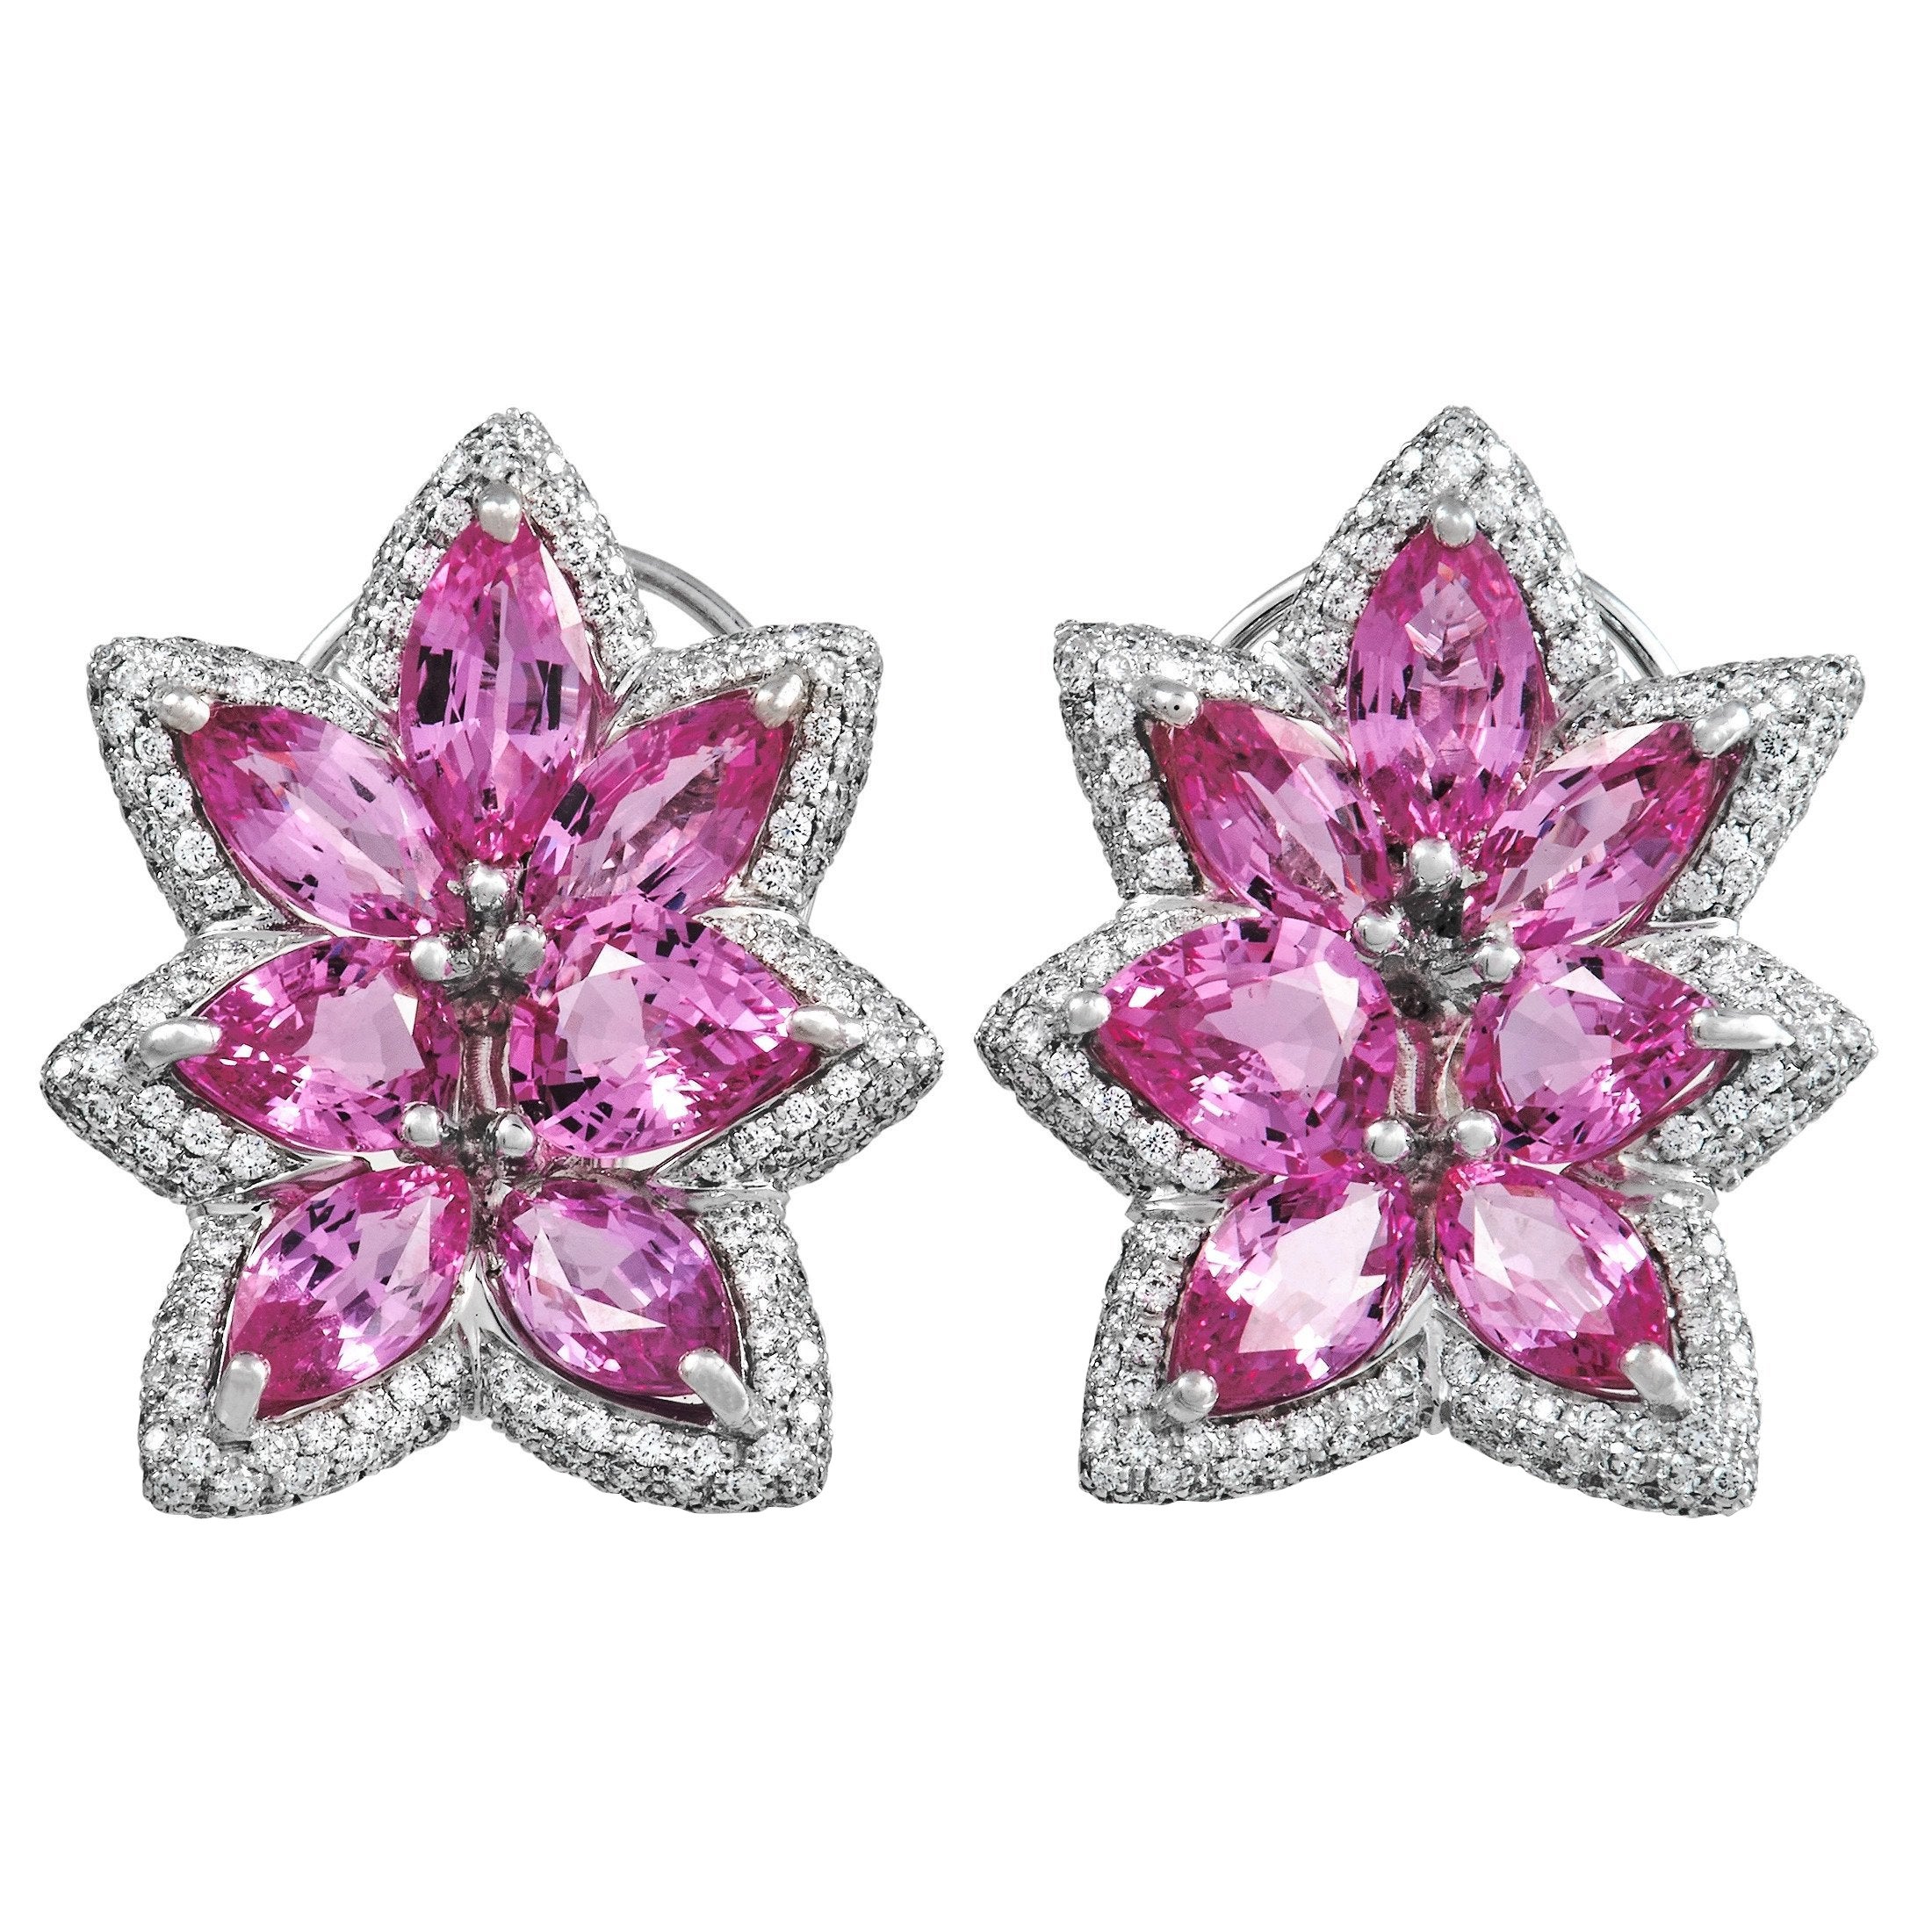 De Grisogono 18K White Gold 1.94 Ct Diamond and Pink Sapphire Earrings For Sale